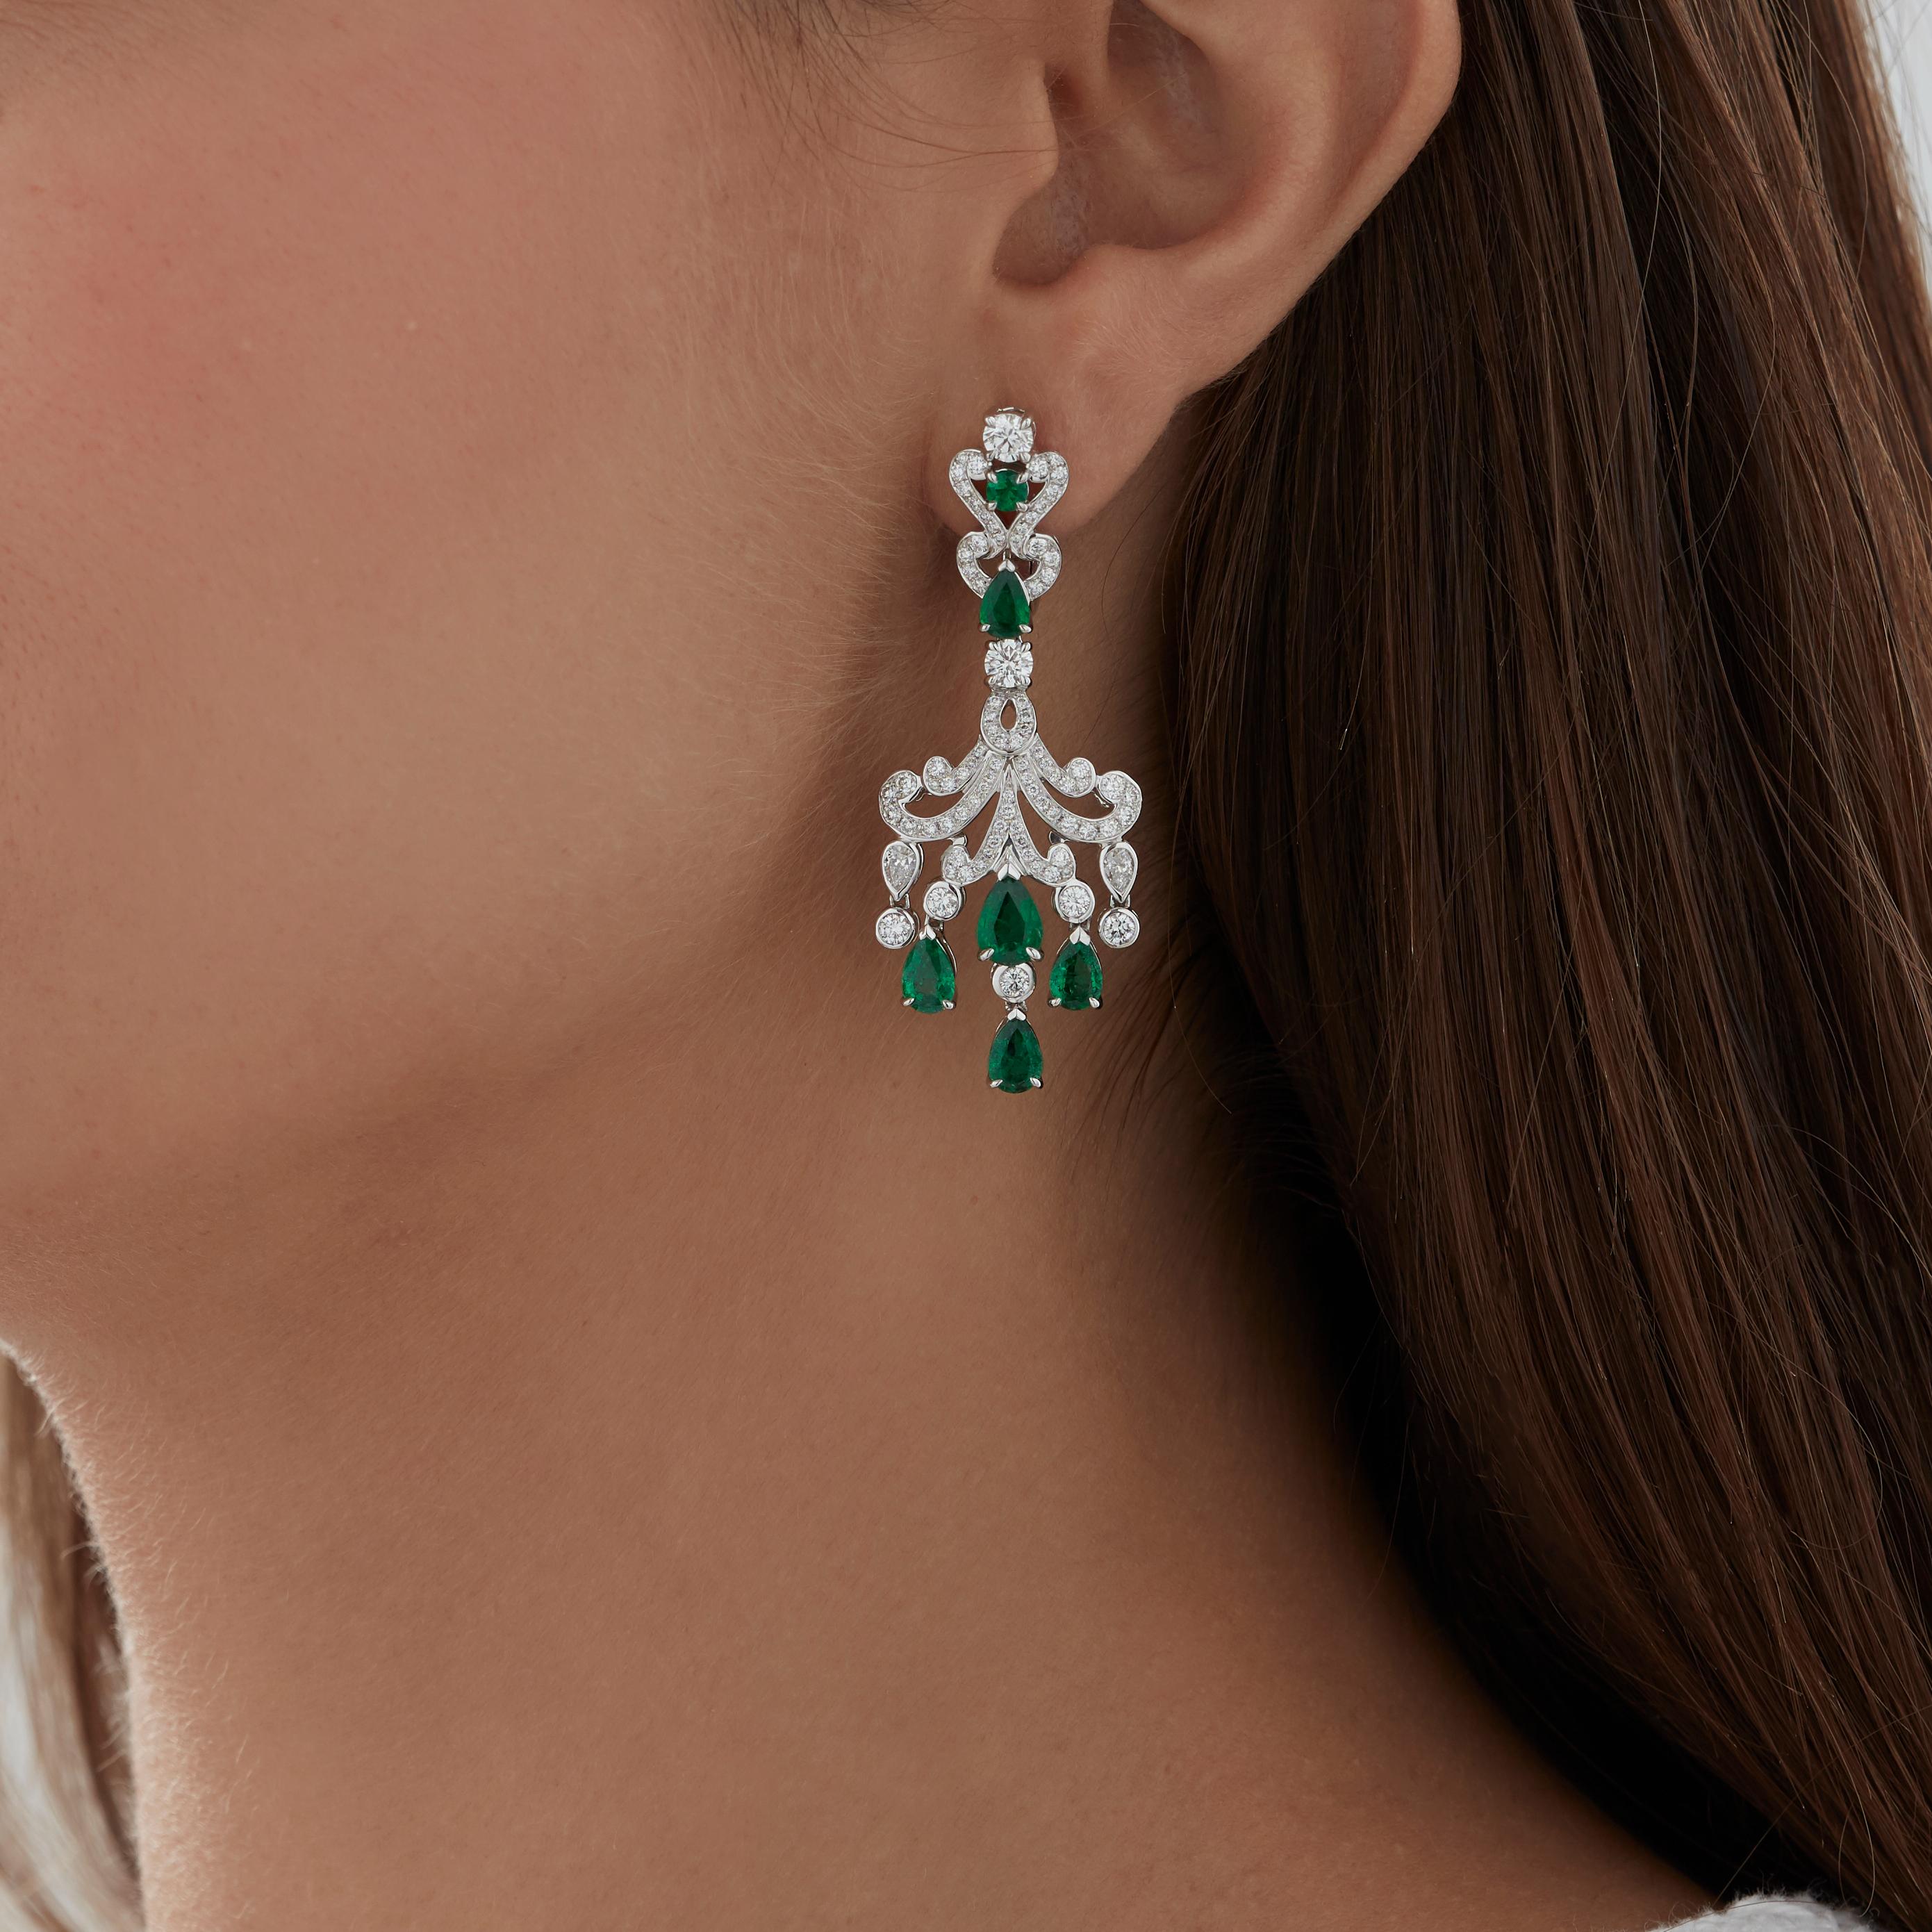 A House of Garrard pair of 18 karat white gold 'Waterlily' drop earrings, set with white diamonds  and round and pearshape emeralds.

178 white diamonds weighing 2.50cts
2 round emeralds weighing: 0.23cts
10 pearshape emeralds weighing: